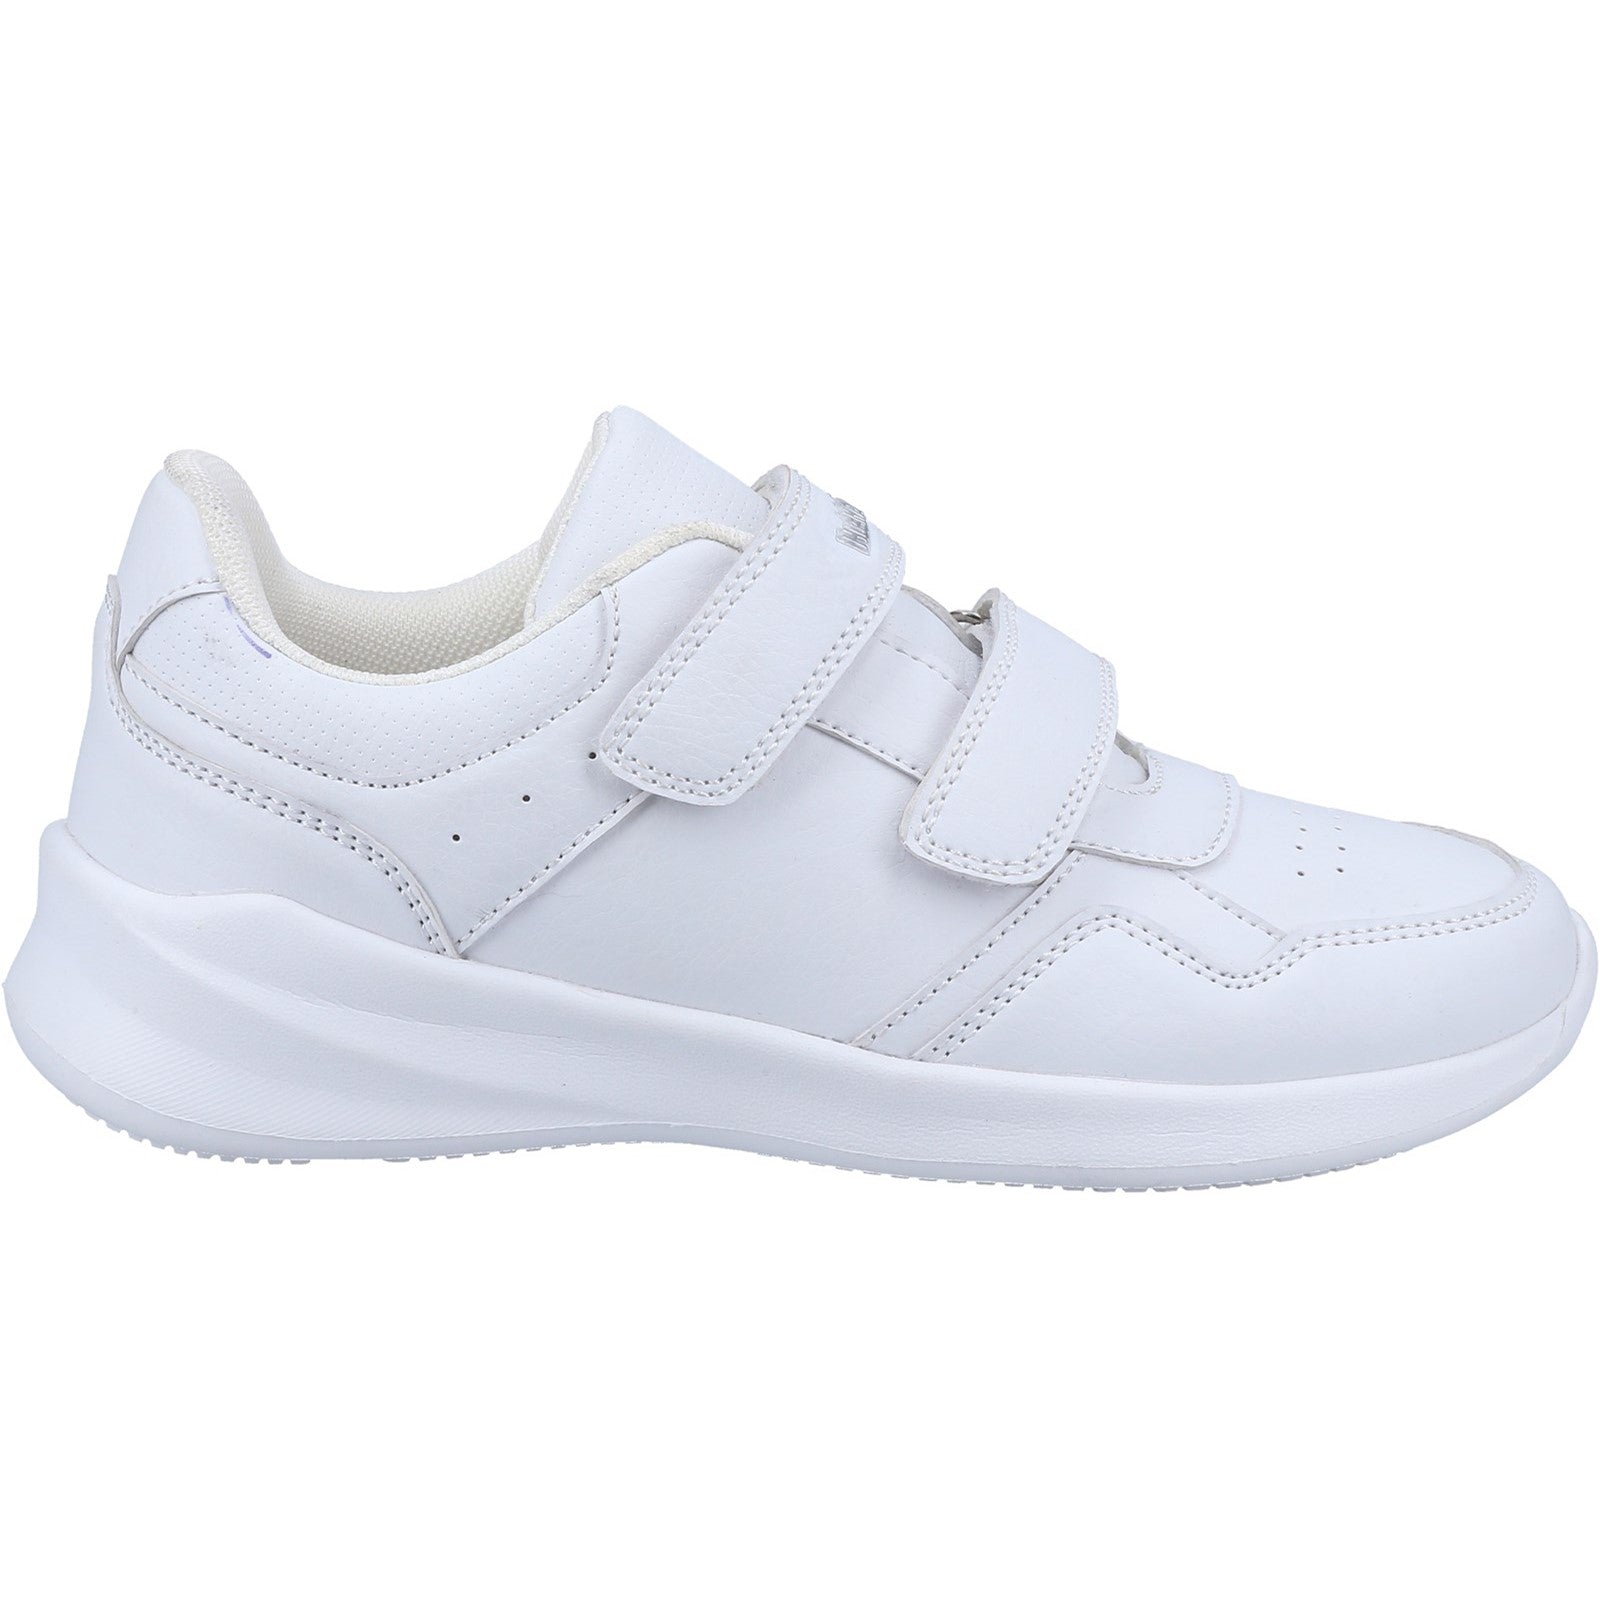 Hush Puppies Kids Marling Leather Trainers - White